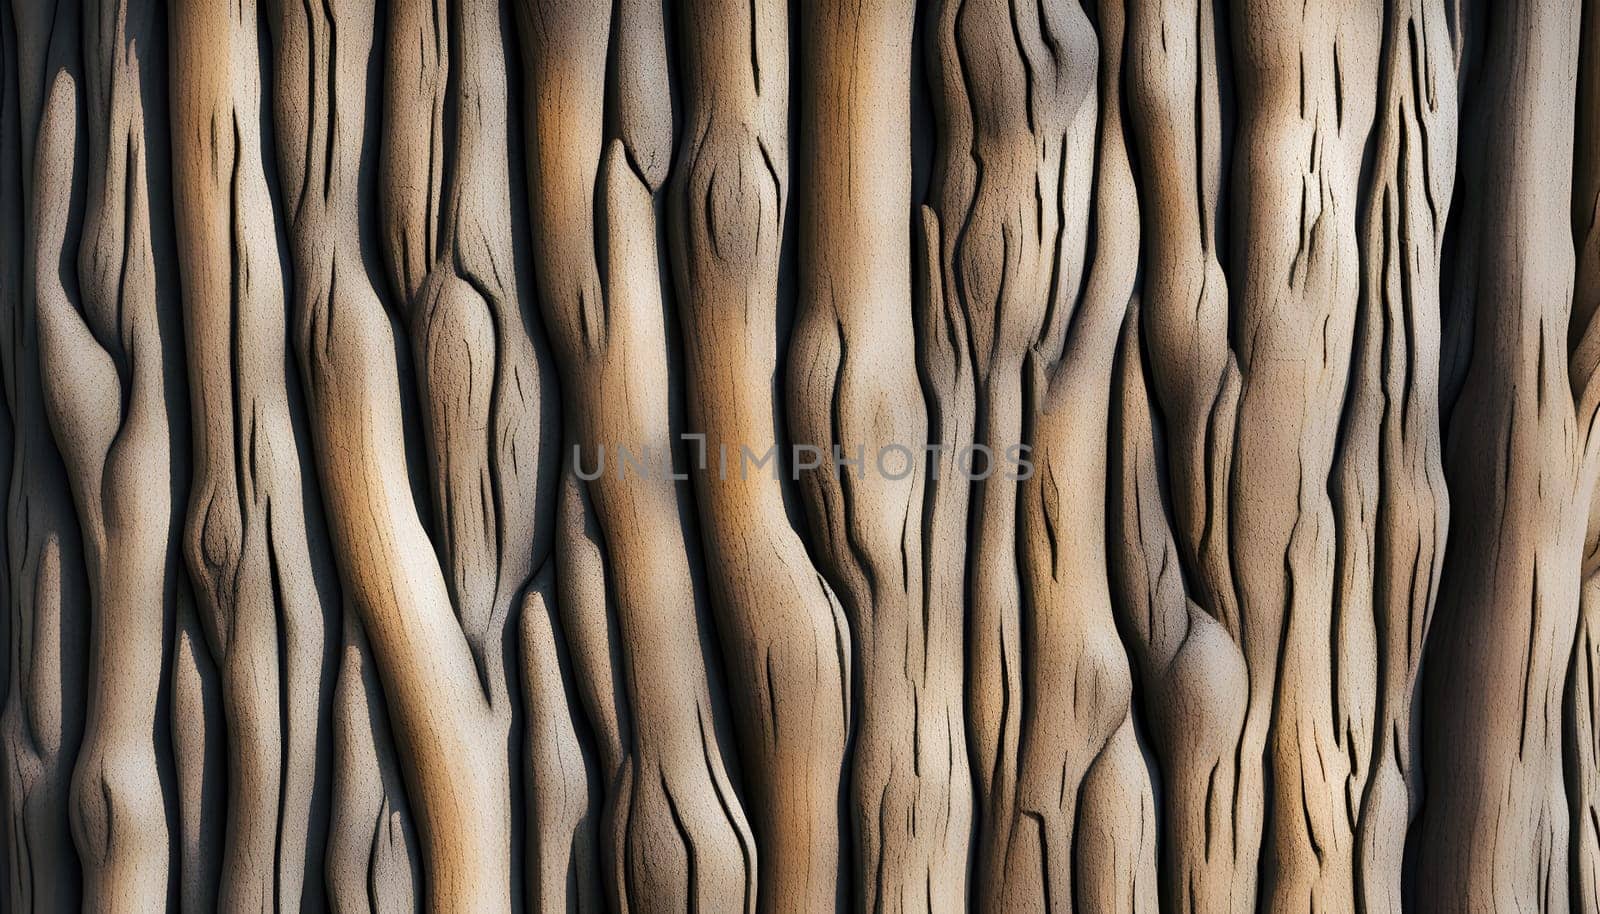 Abstract Wooden Textures and Patterns by rostik924